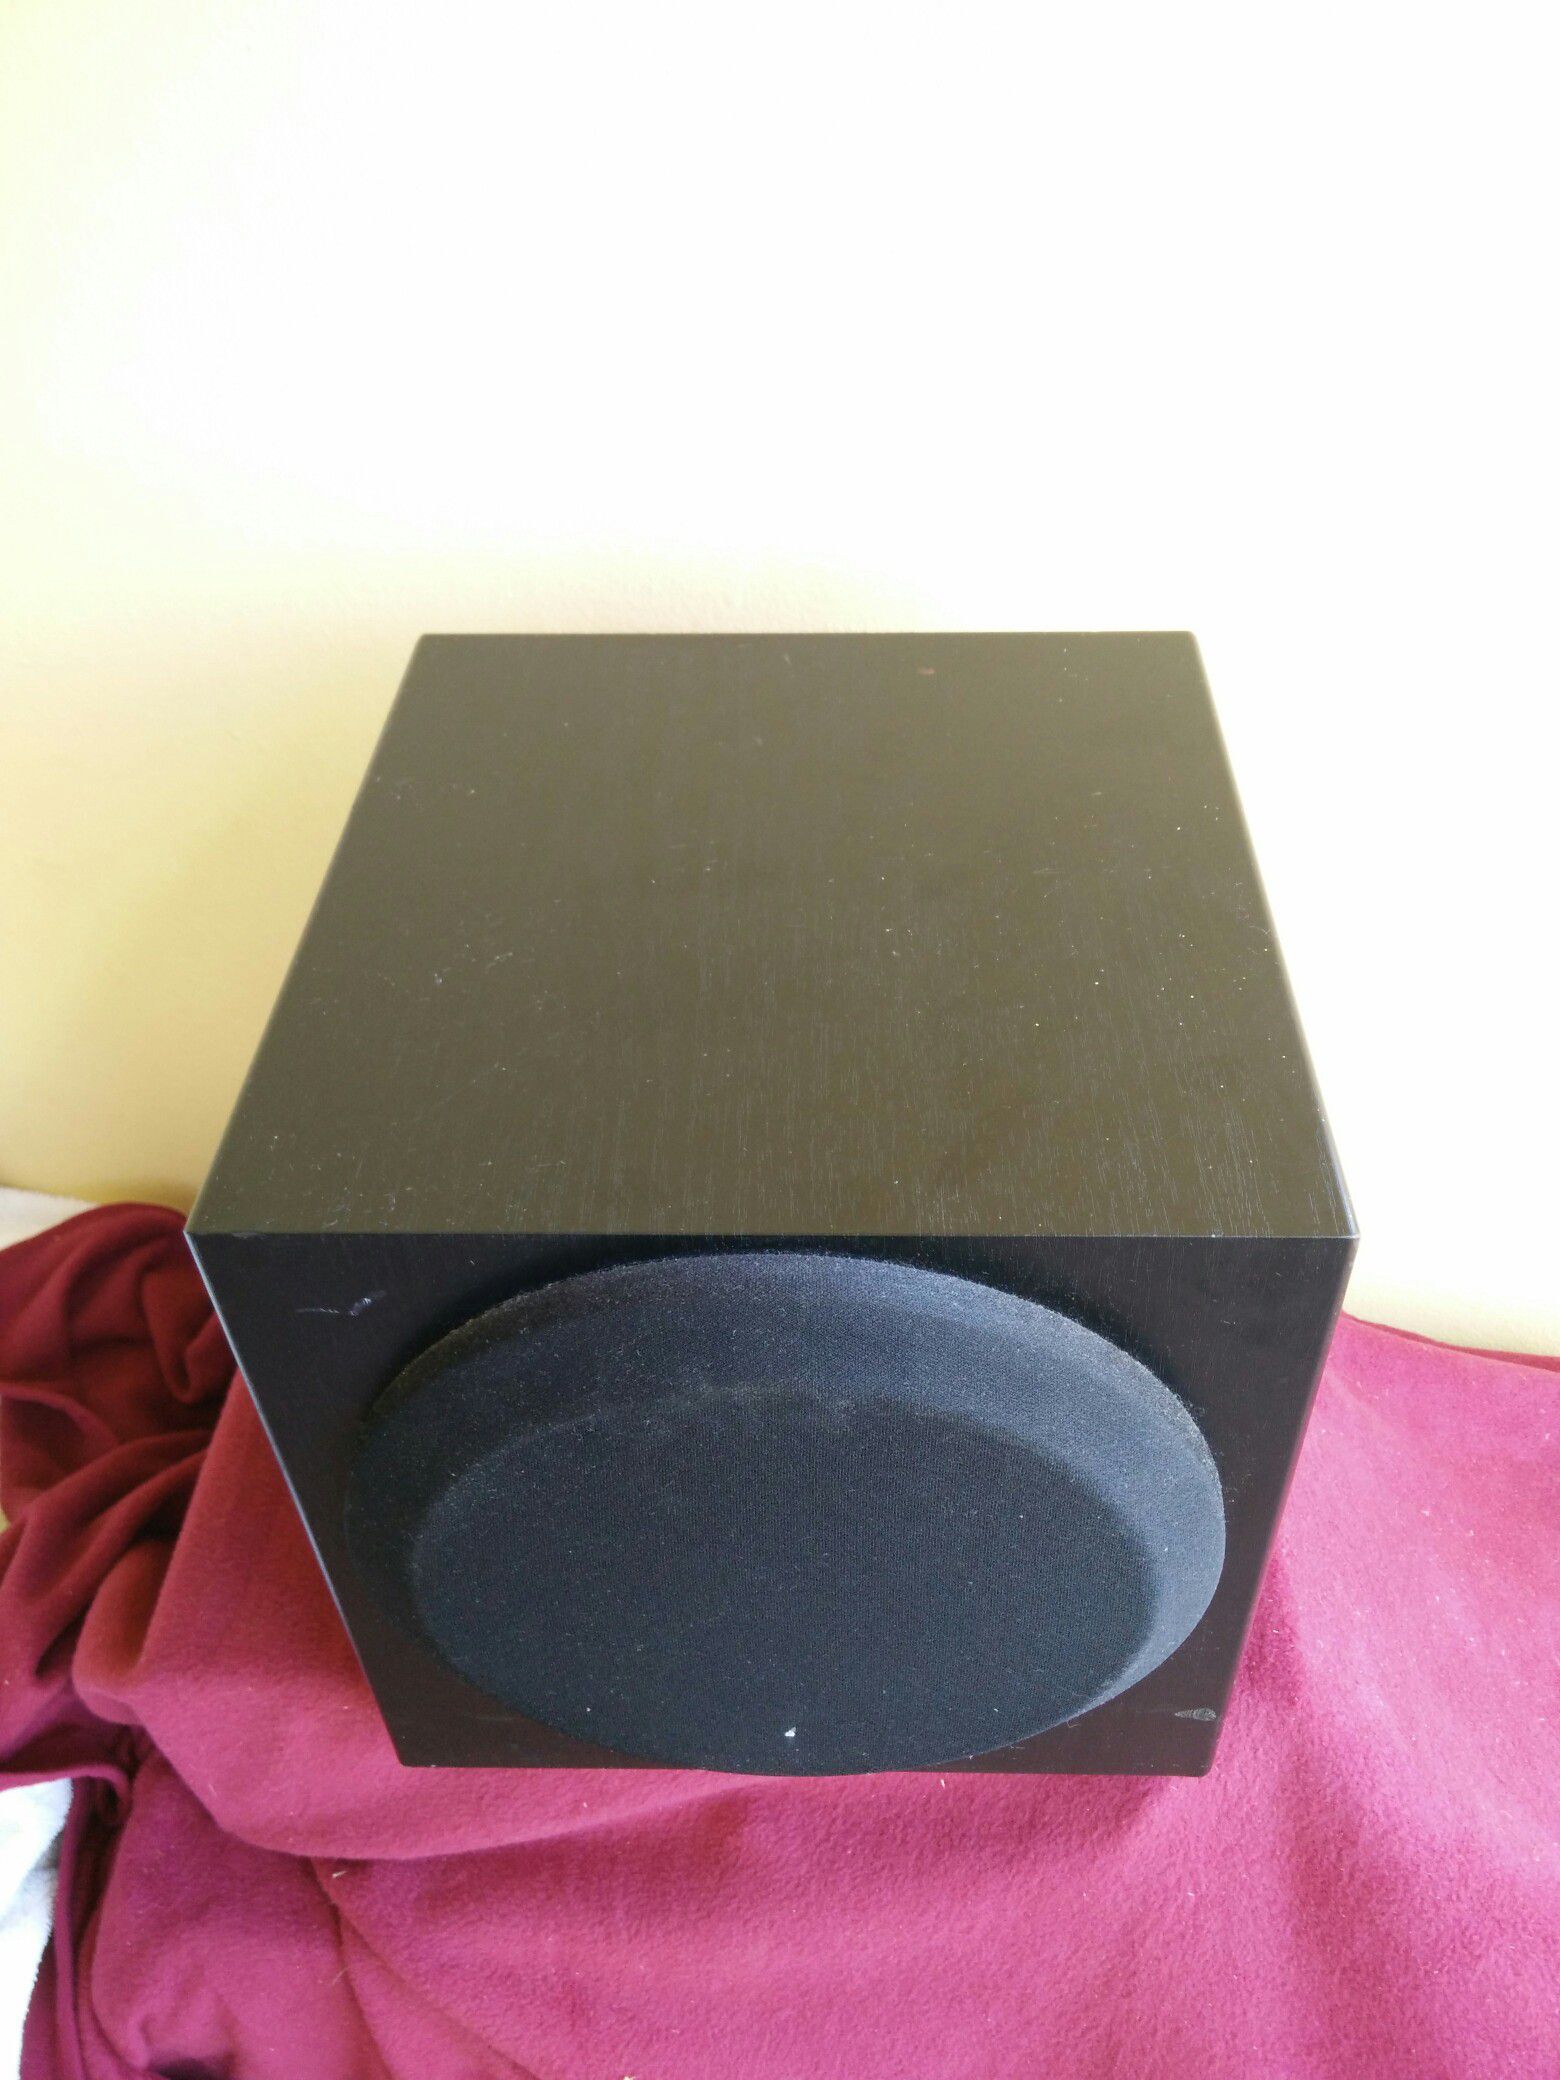 Yamaha subwoofer..near mint!! Sounds awesome!! Very compact!!